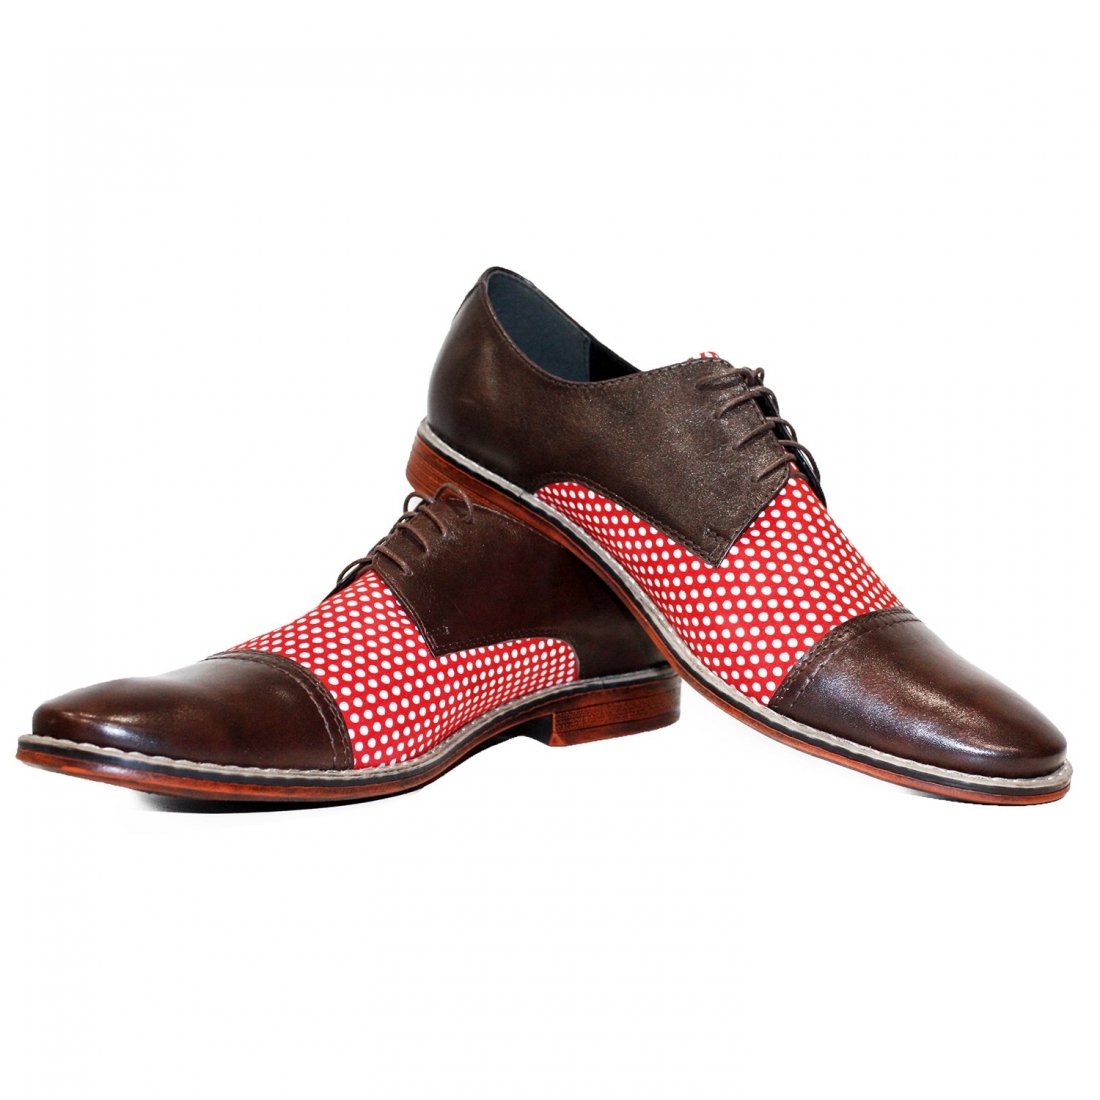 Modello Polltetto - Business Schuhe - Handmade Colorful Italian Leather Shoes